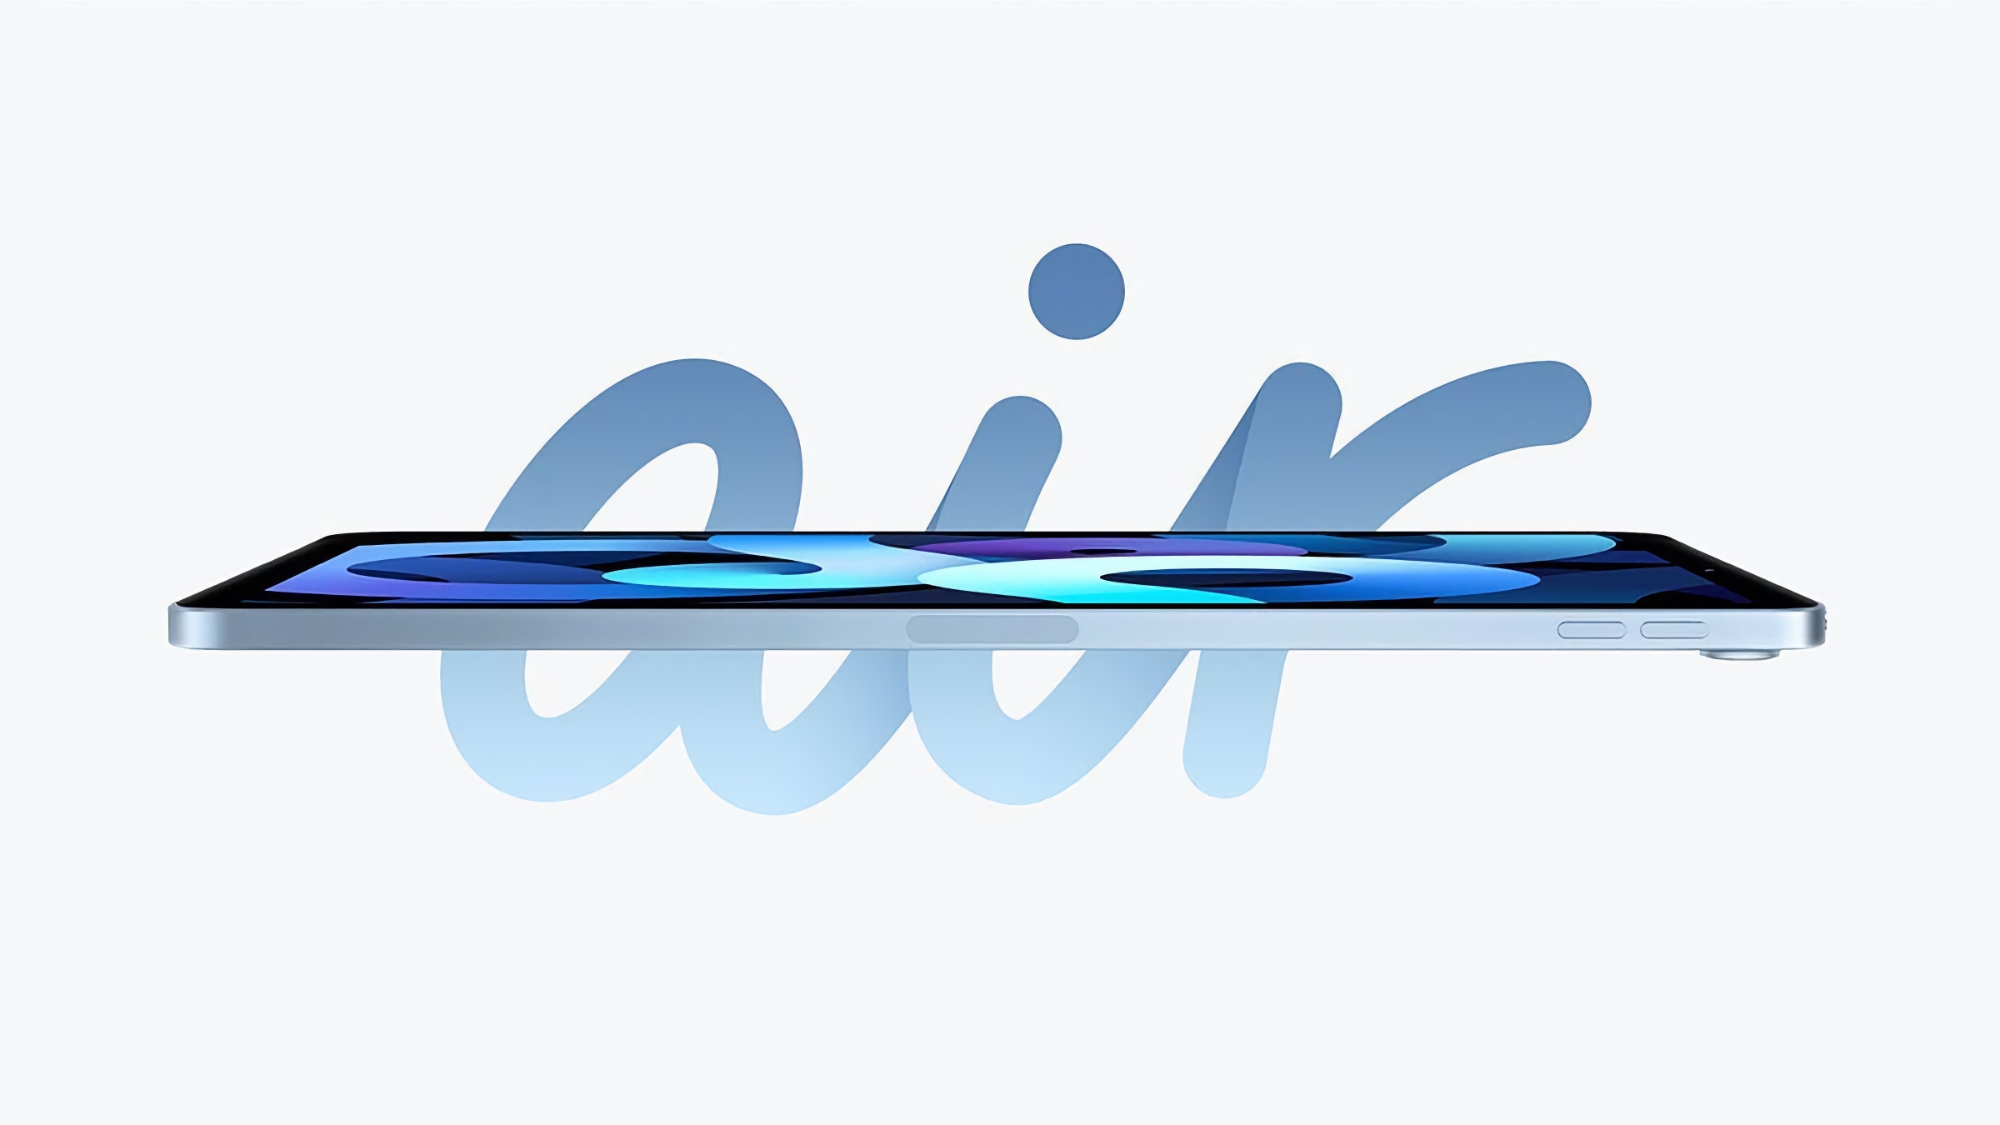 Source: Apple will show a new iPad Air with A15 Bionic chip, 5G support and a wide-angle front camera in the spring